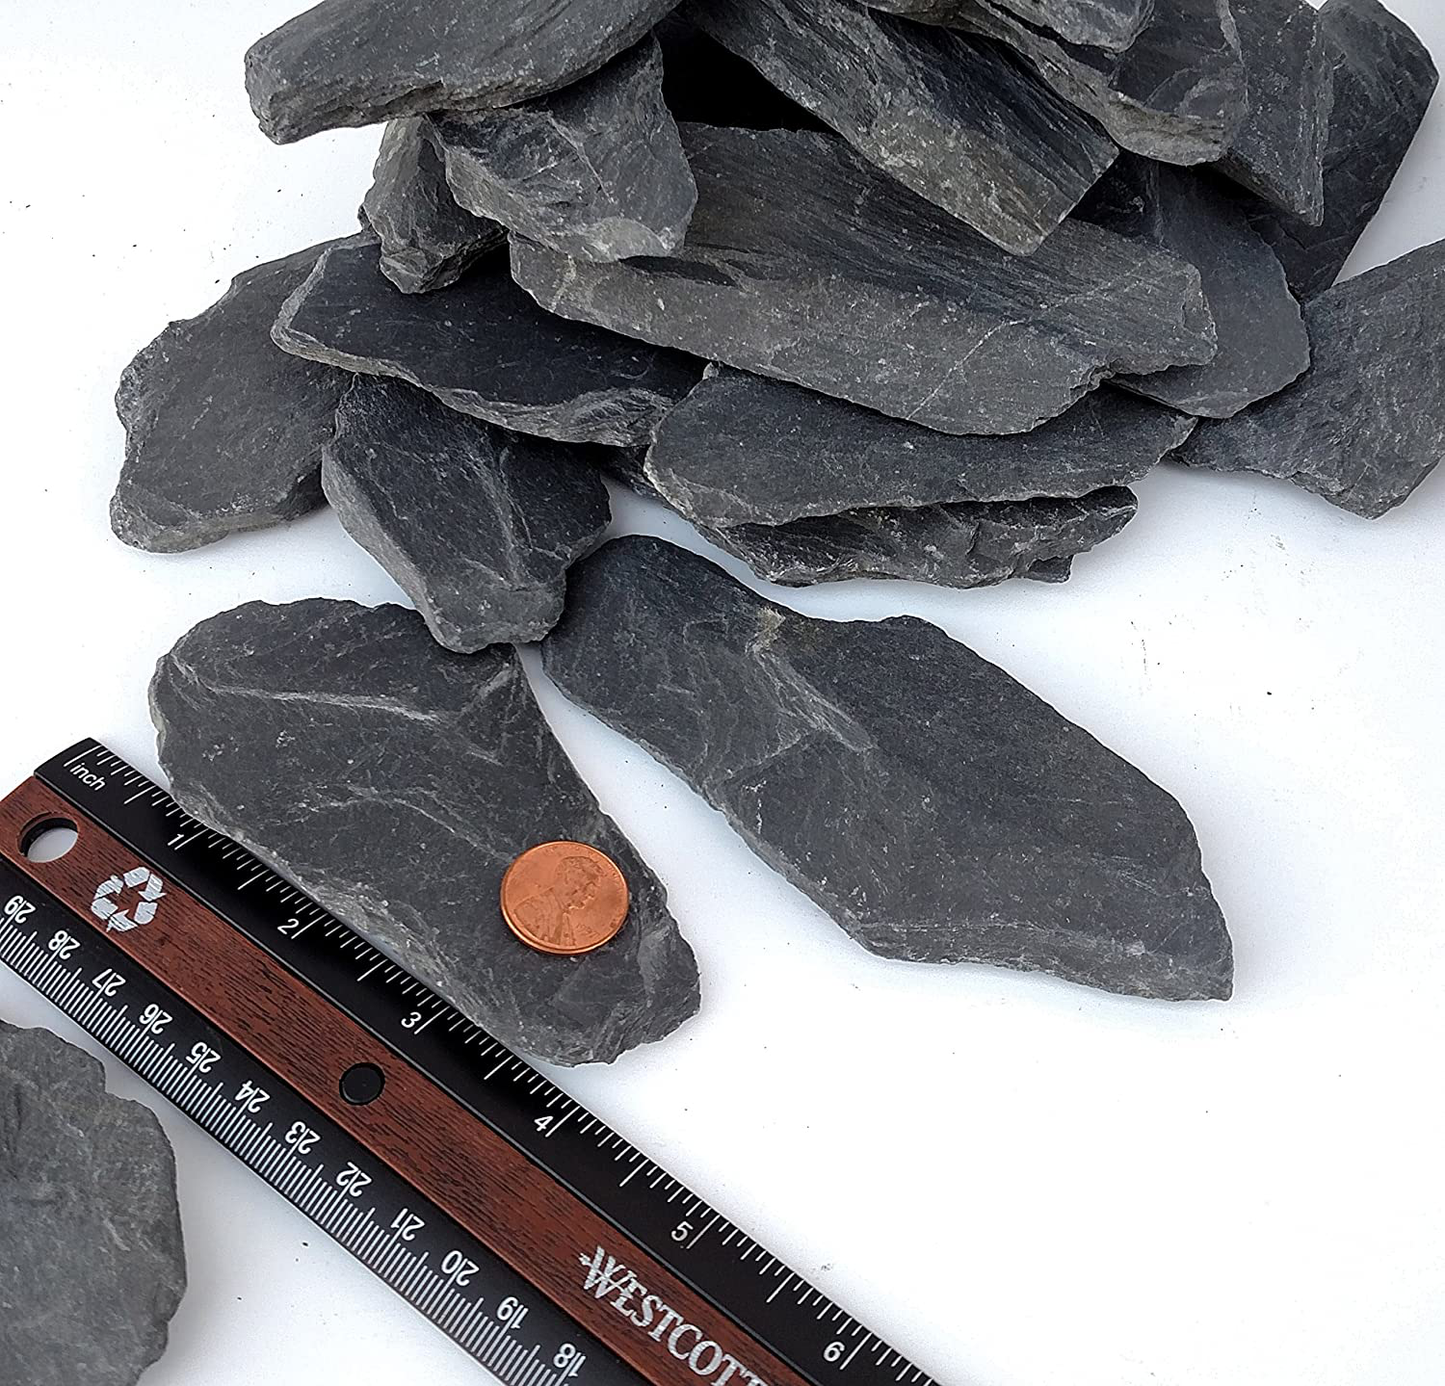 Natural Slate Stone 3 to 5 Inch Rocks for Miniature and Fairy Garden, Aquascaping Aquariums, Reptile Enclosures & Model Railroad Animals & Pet Supplies > Pet Supplies > Fish Supplies > Aquarium Decor Small World Slate & Stone   